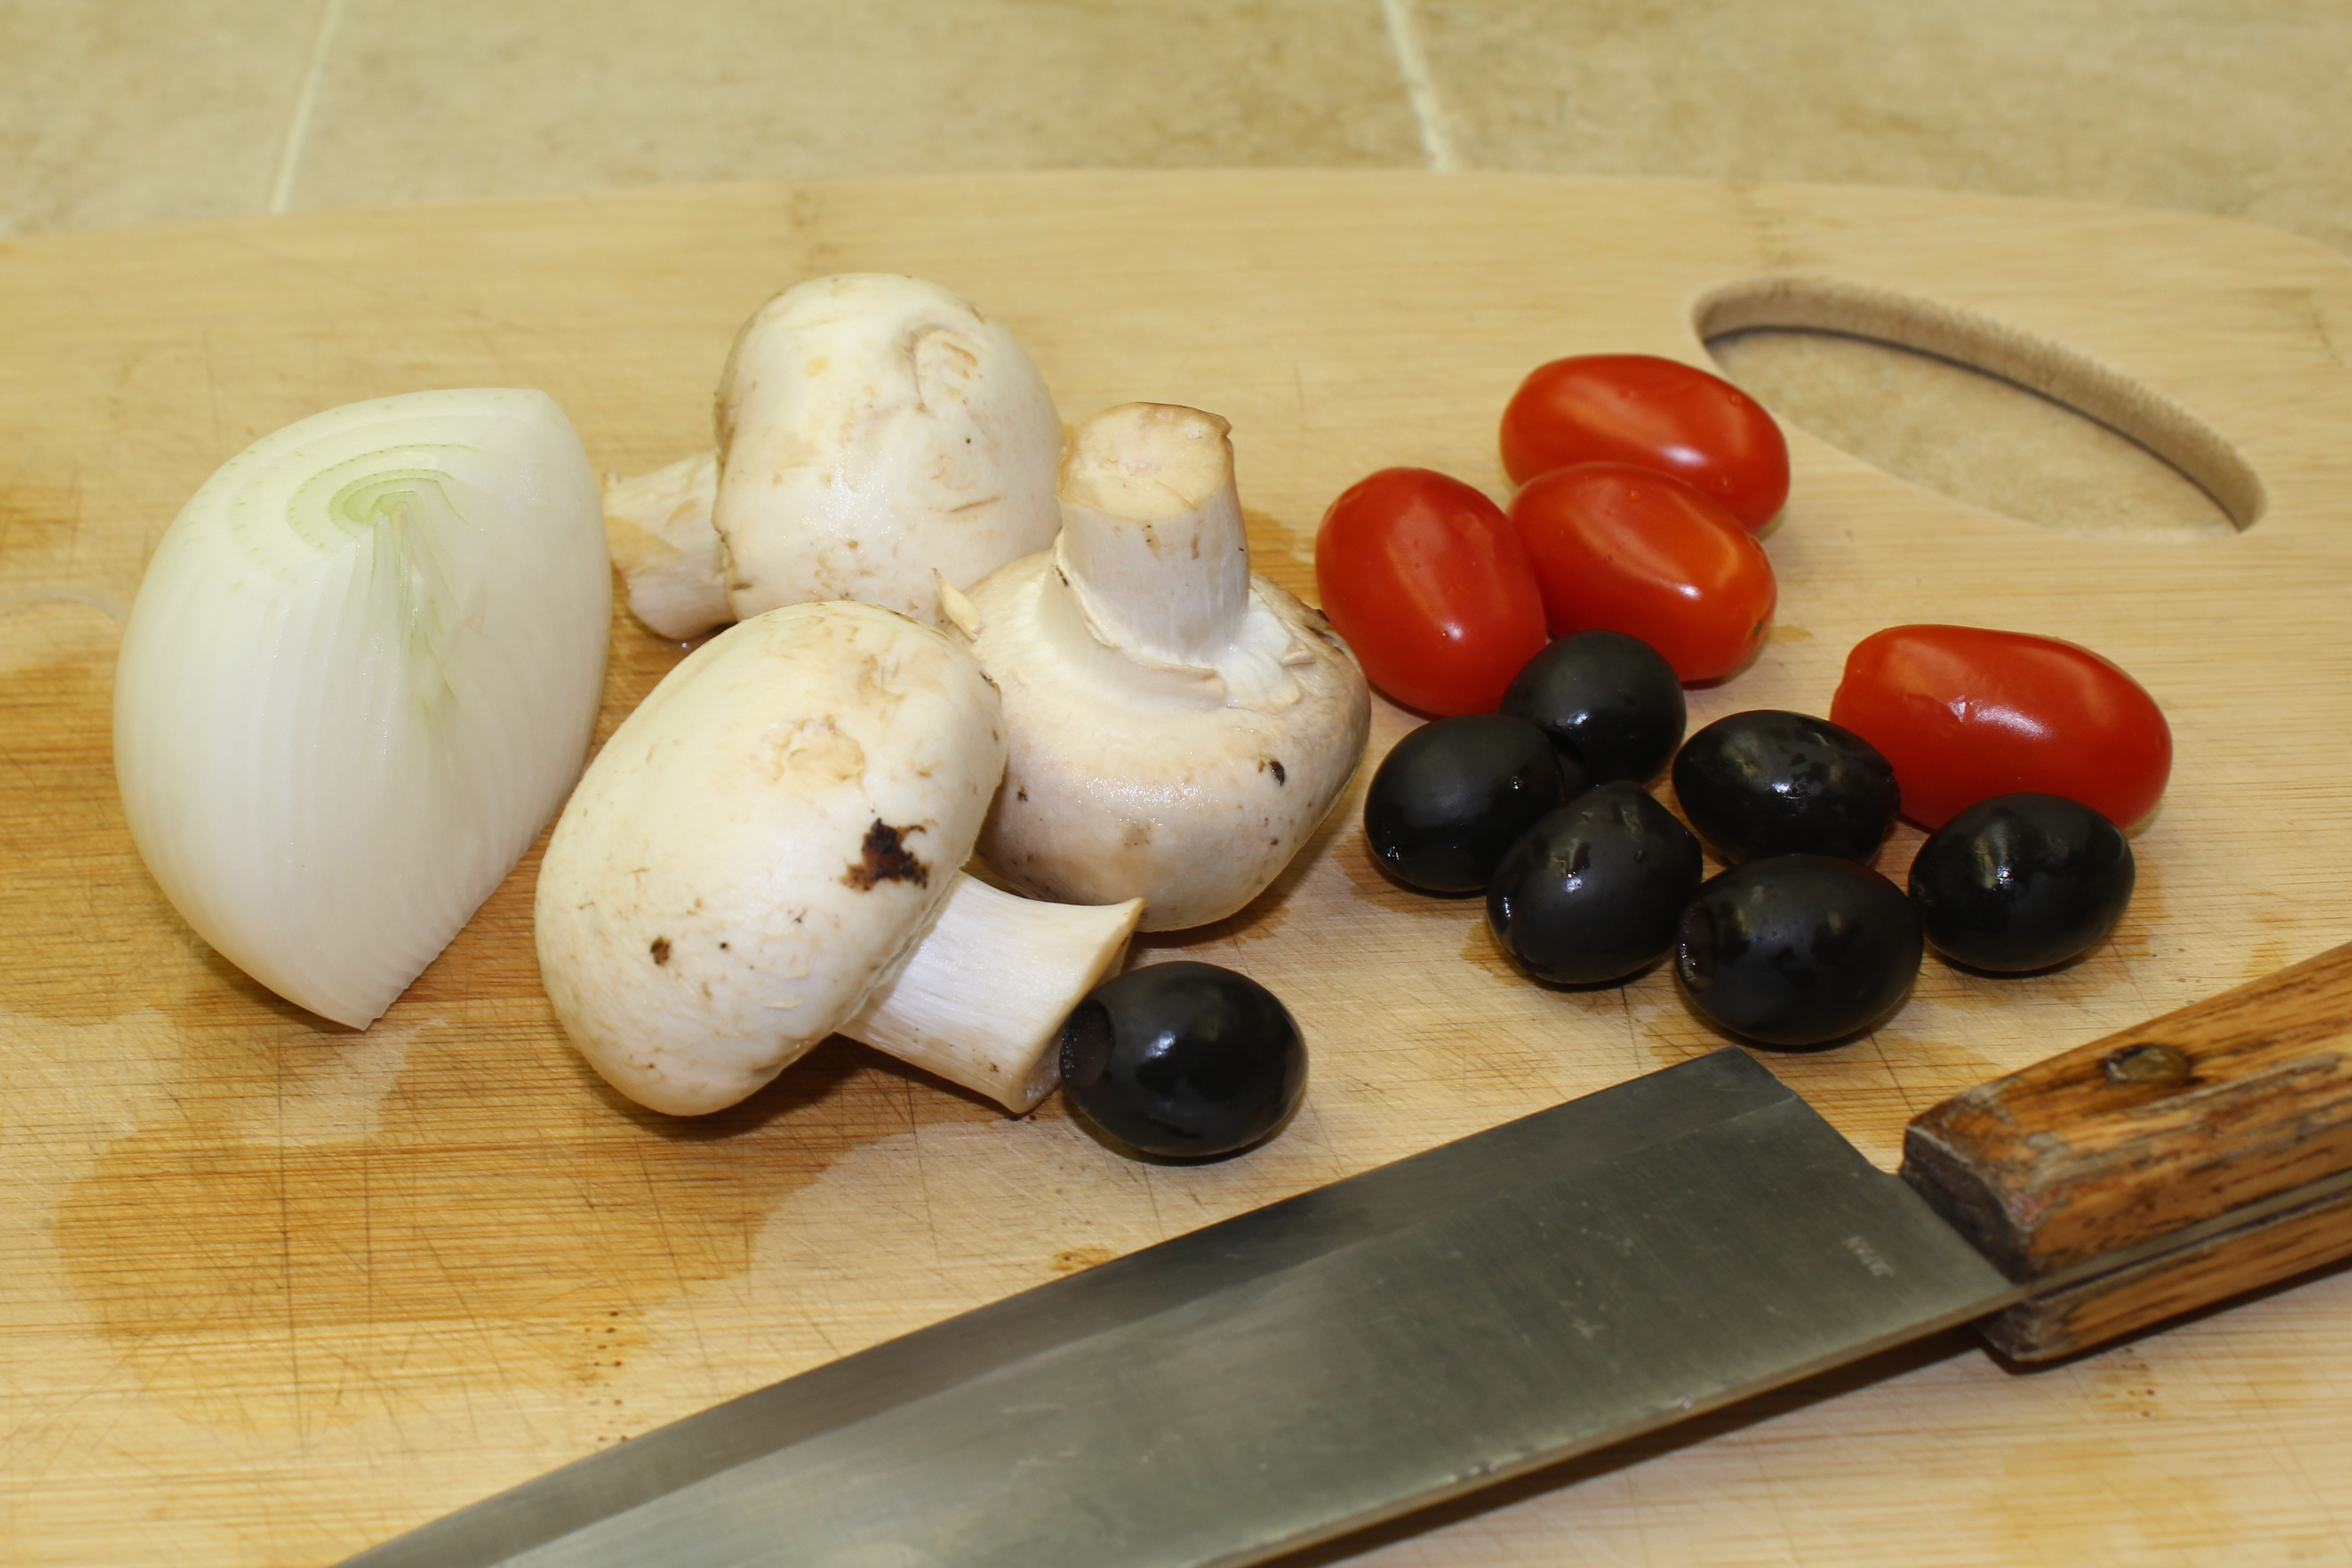 mushrooms, olives and tomatoes on olives on a cutting board